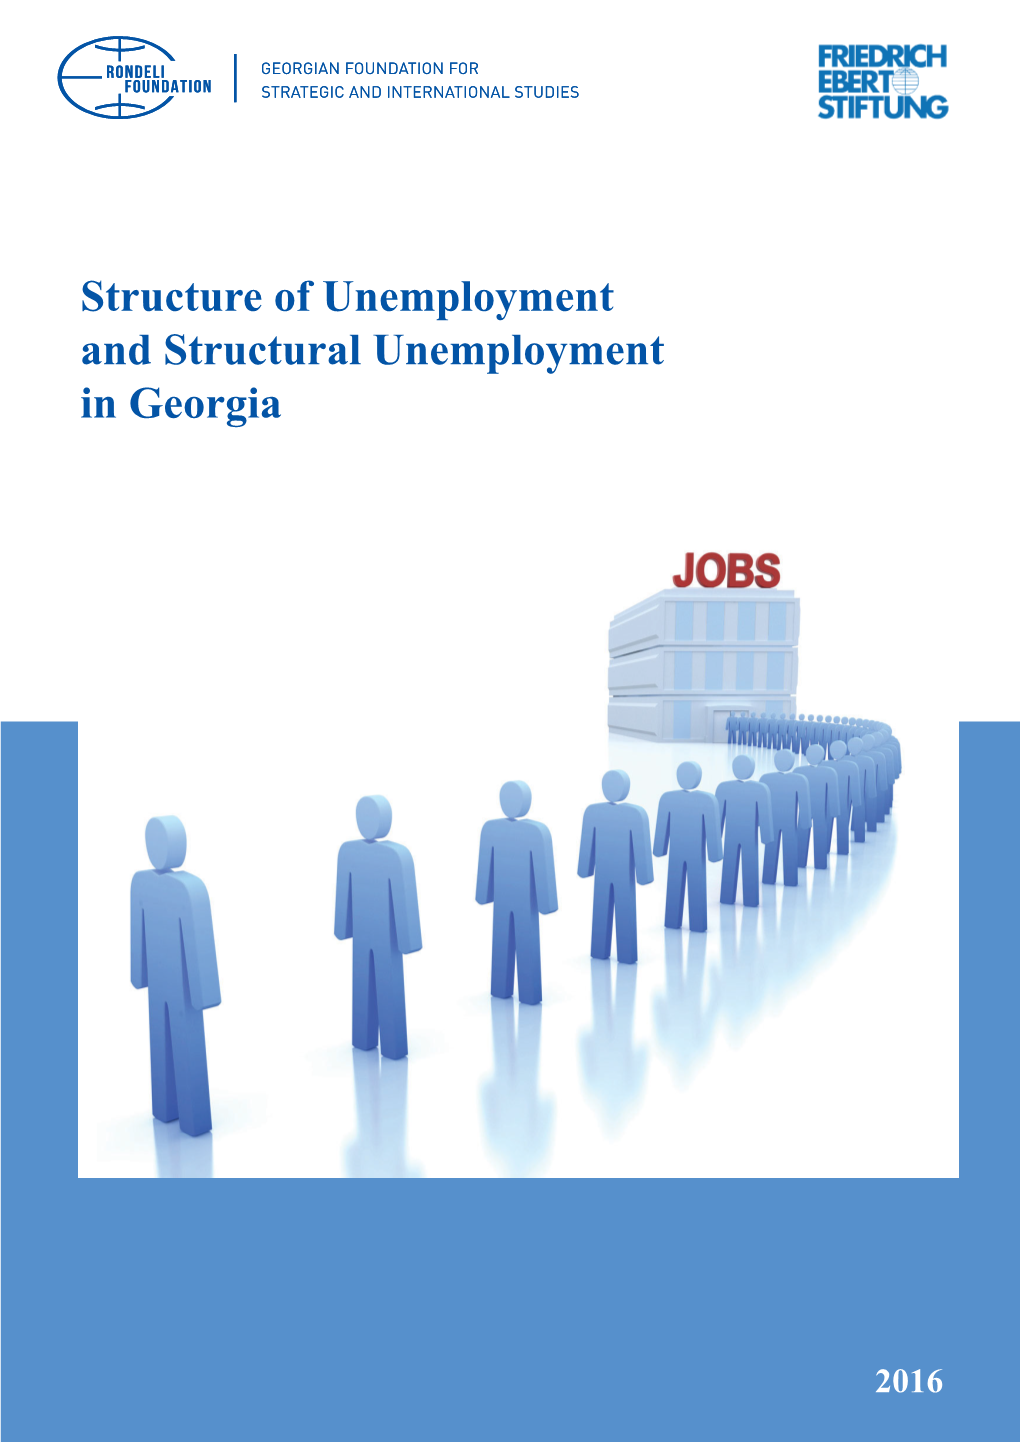 Structure of Unemployment and Structural Unemployment in Georgia